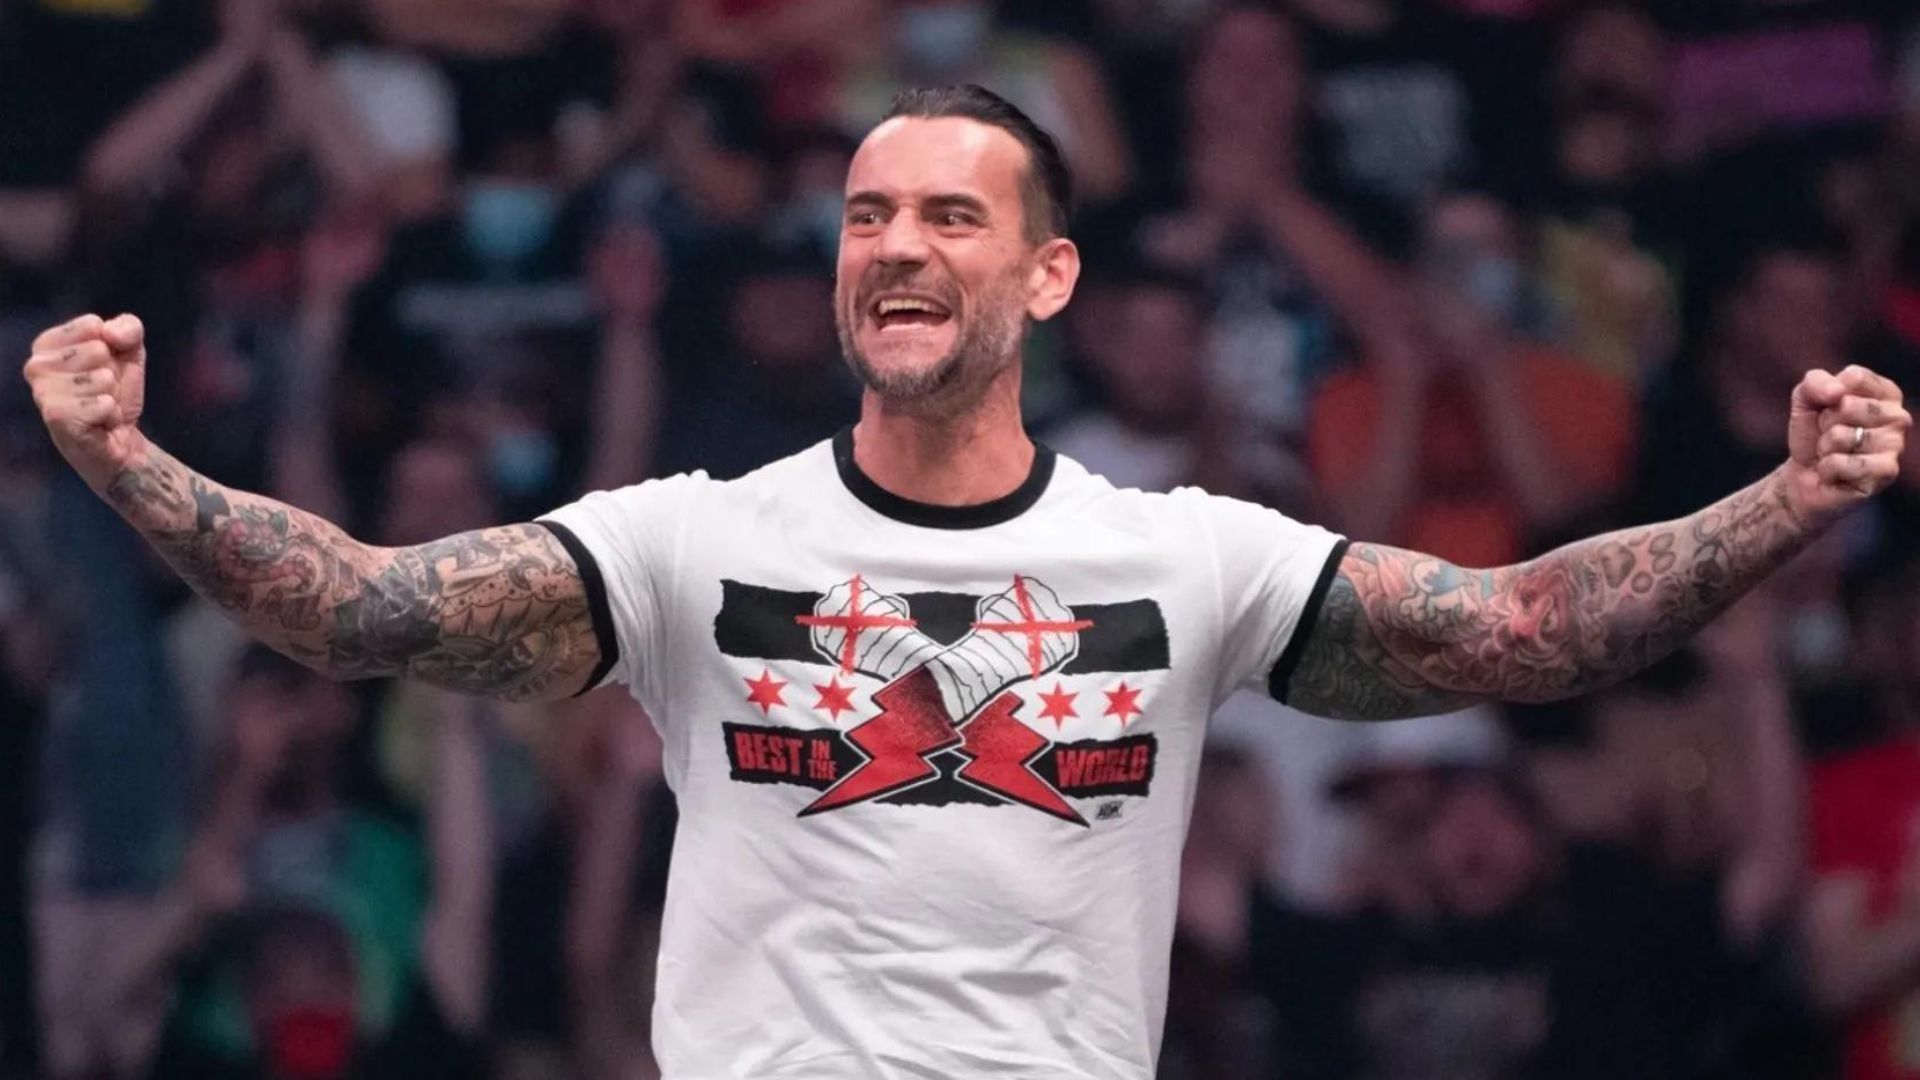 Punk was fired by All Elite Wrestling in September.